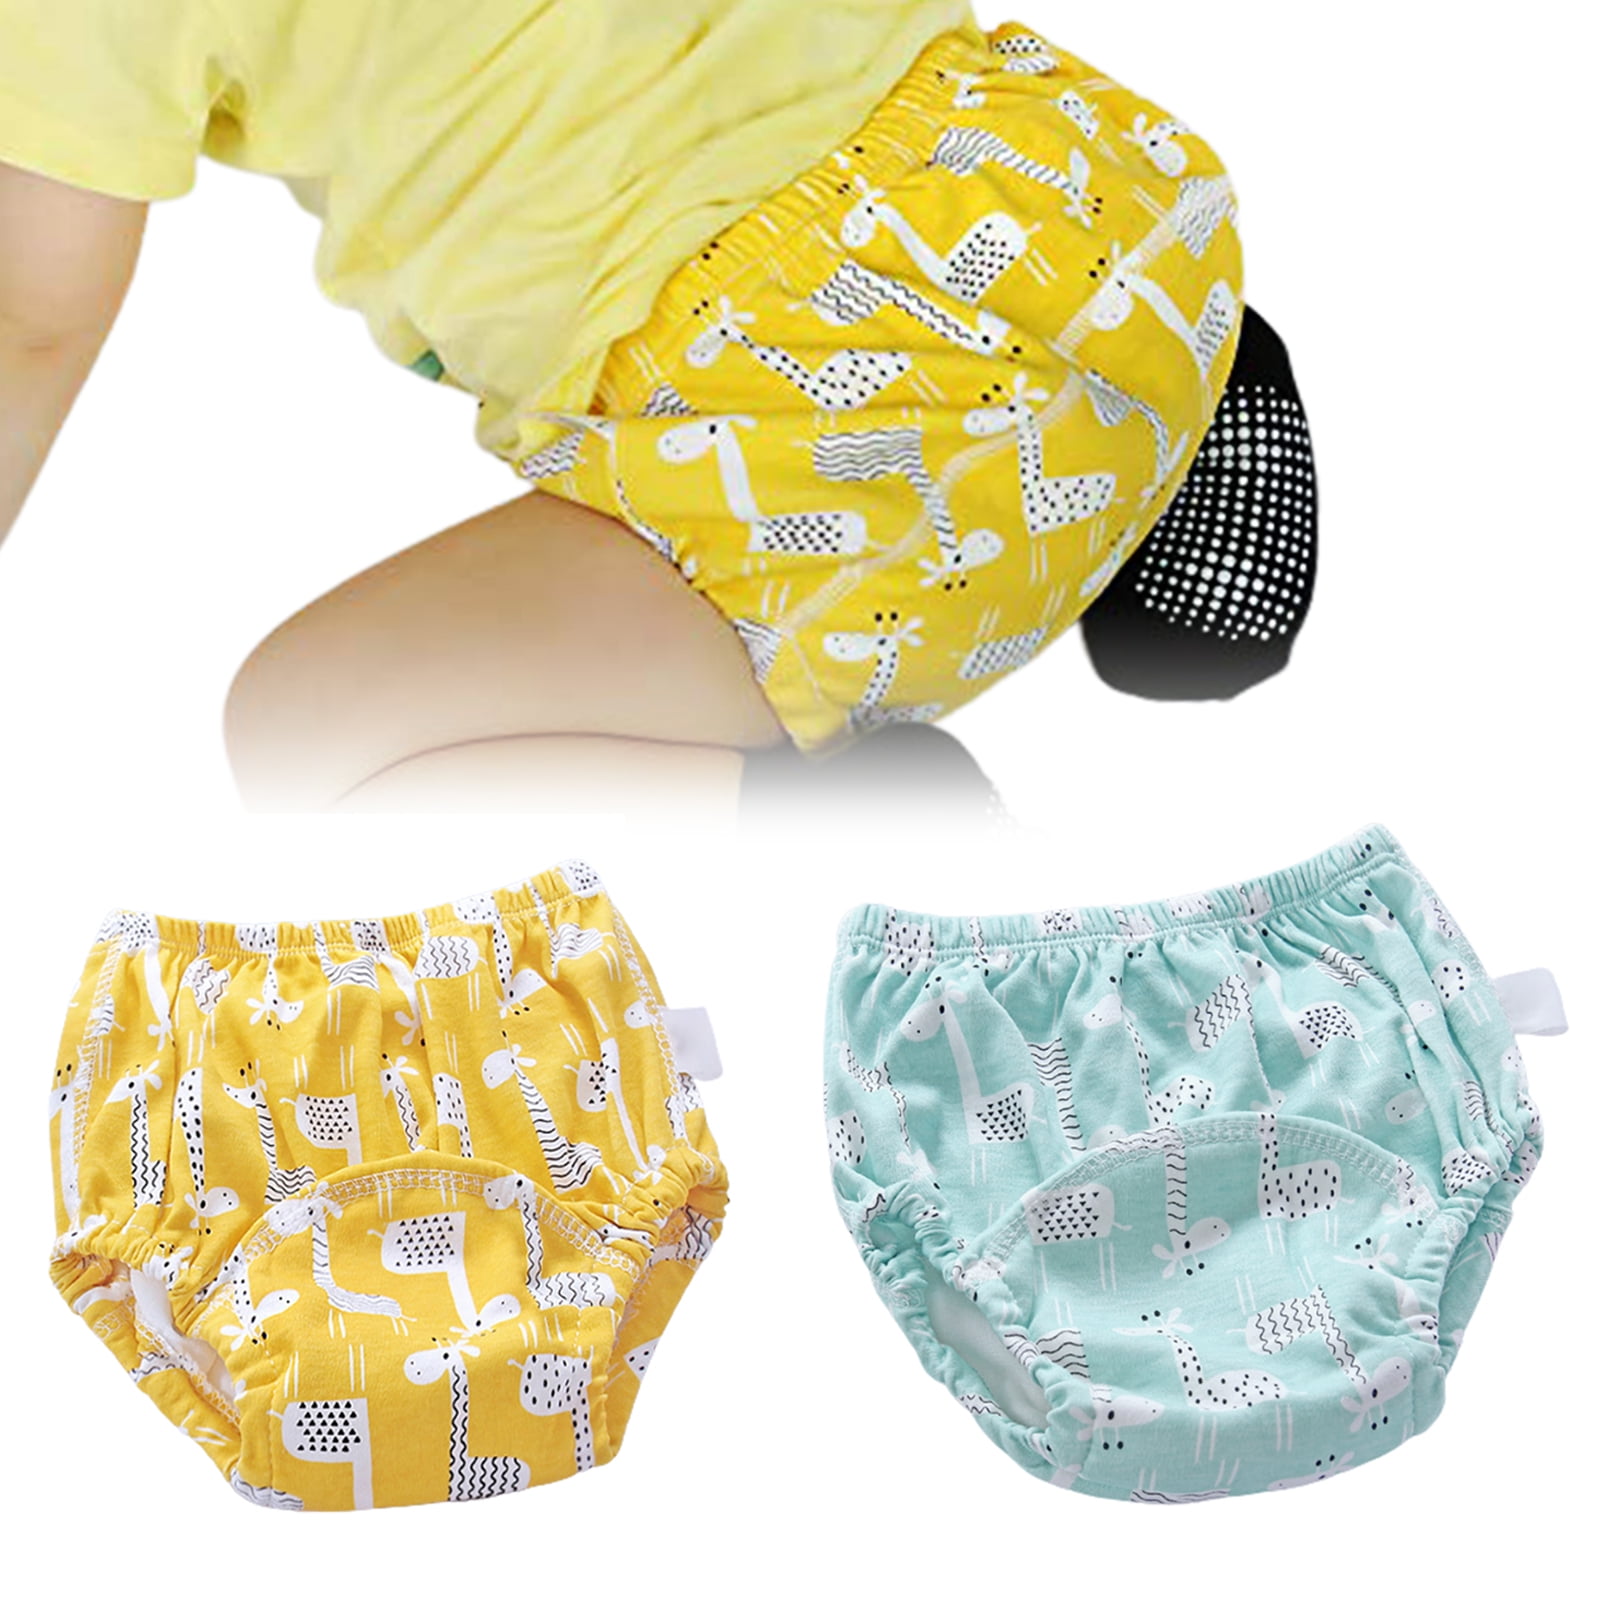 Baby Cloth Waterproof Diapers Nappies Adjustable Training Pants For Newborn Hot 